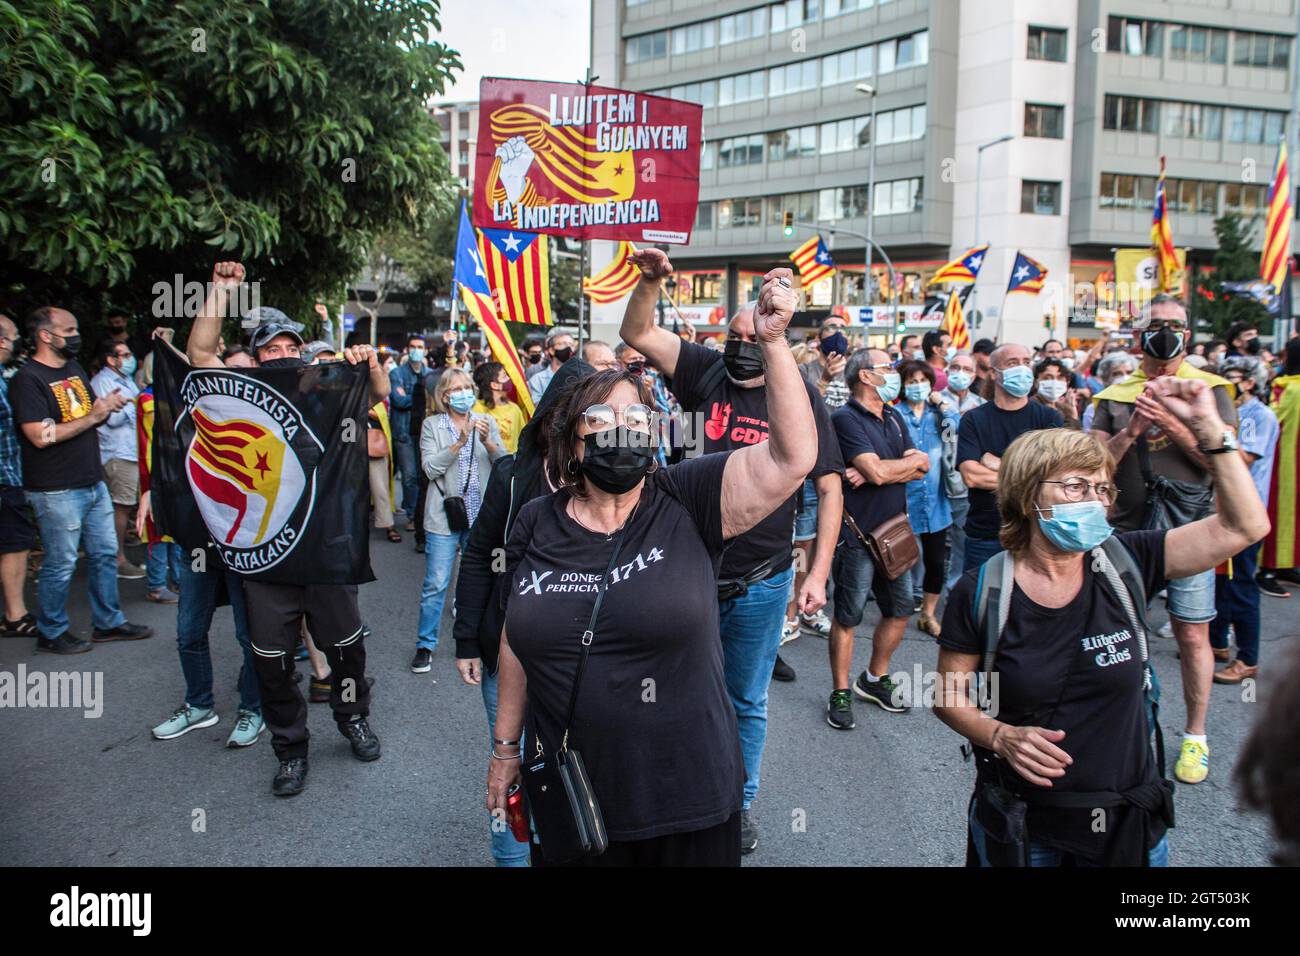 Barcelona, Spain. 01st Oct, 2021. Protesters shouting slogans and making gestures, during the demonstration. The activist group, CDR (Committees for the Defense of the Republic) has called a demonstration against the Spanish state and for the independence of Catalonia on October 1 the fourth anniversary of the Catalan independence referendum of 2017 (Photo by Thiago Prudencio/SOPA Images/Sipa USA) Credit: Sipa USA/Alamy Live News Stock Photo